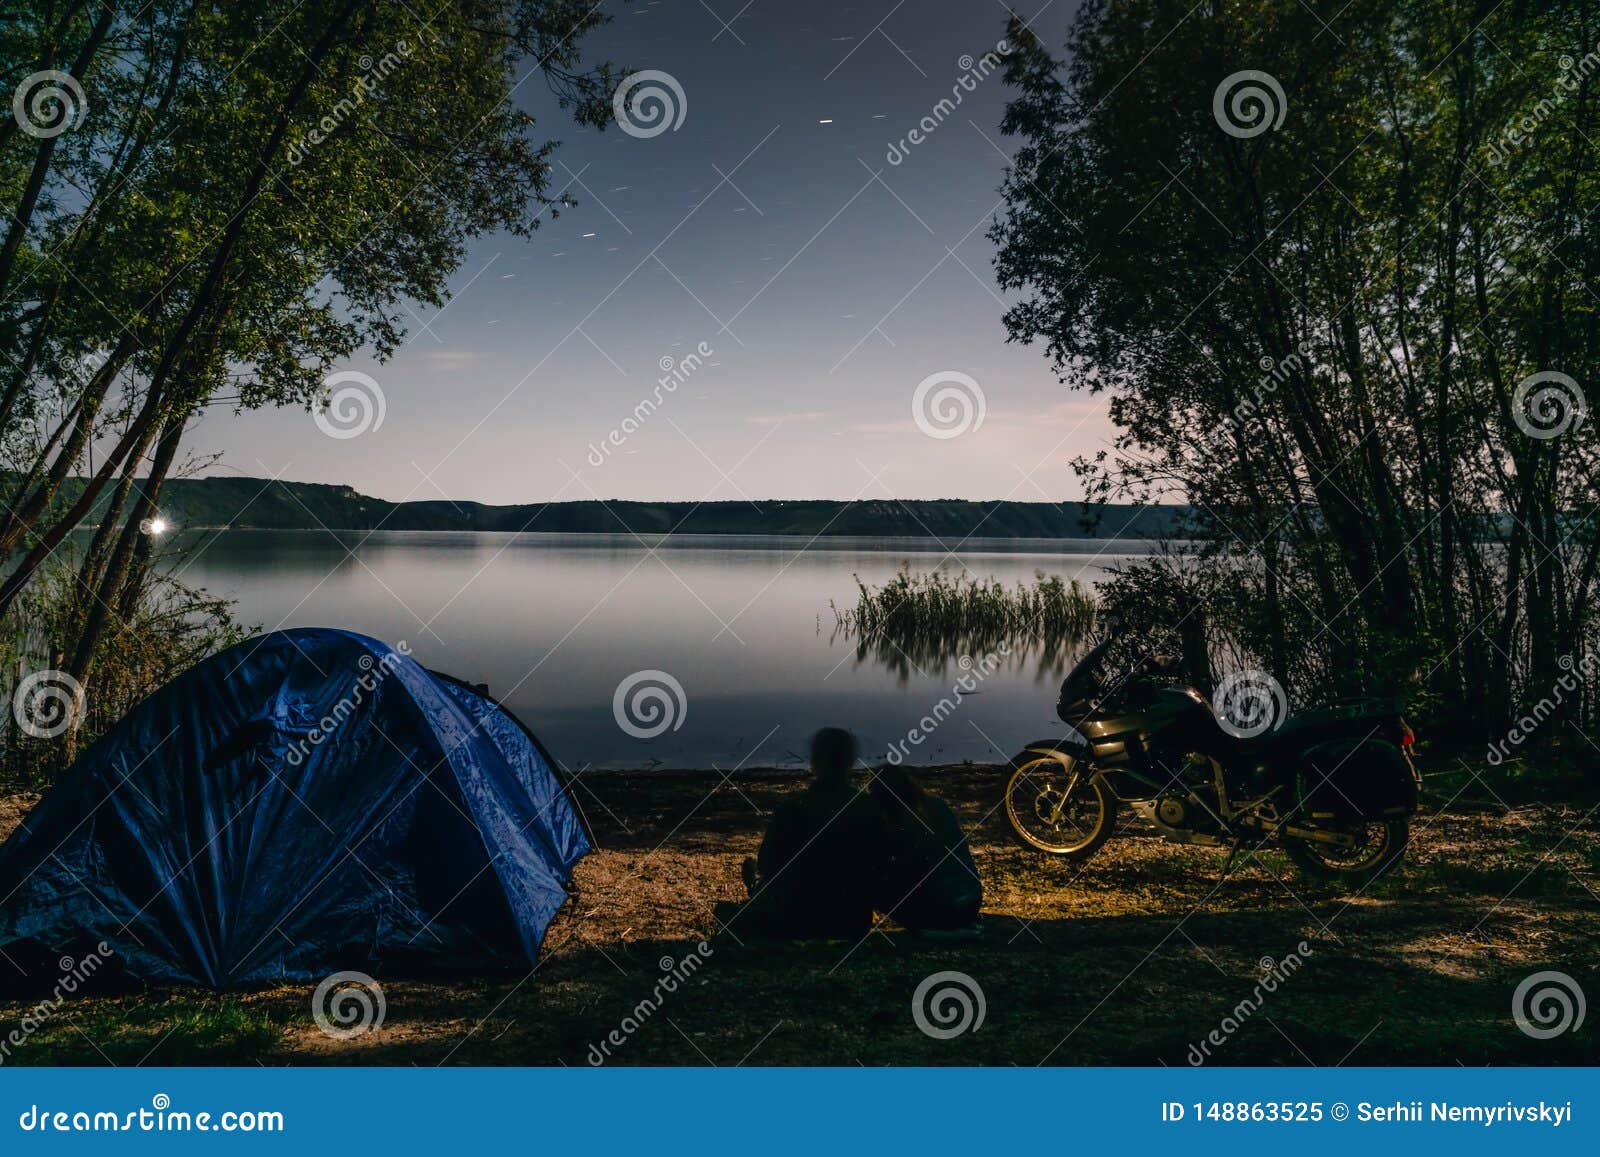 night camping on lake shore. man and woman is sitting. couple tourists enjoying amazing view of night sky full of stars. blue tent